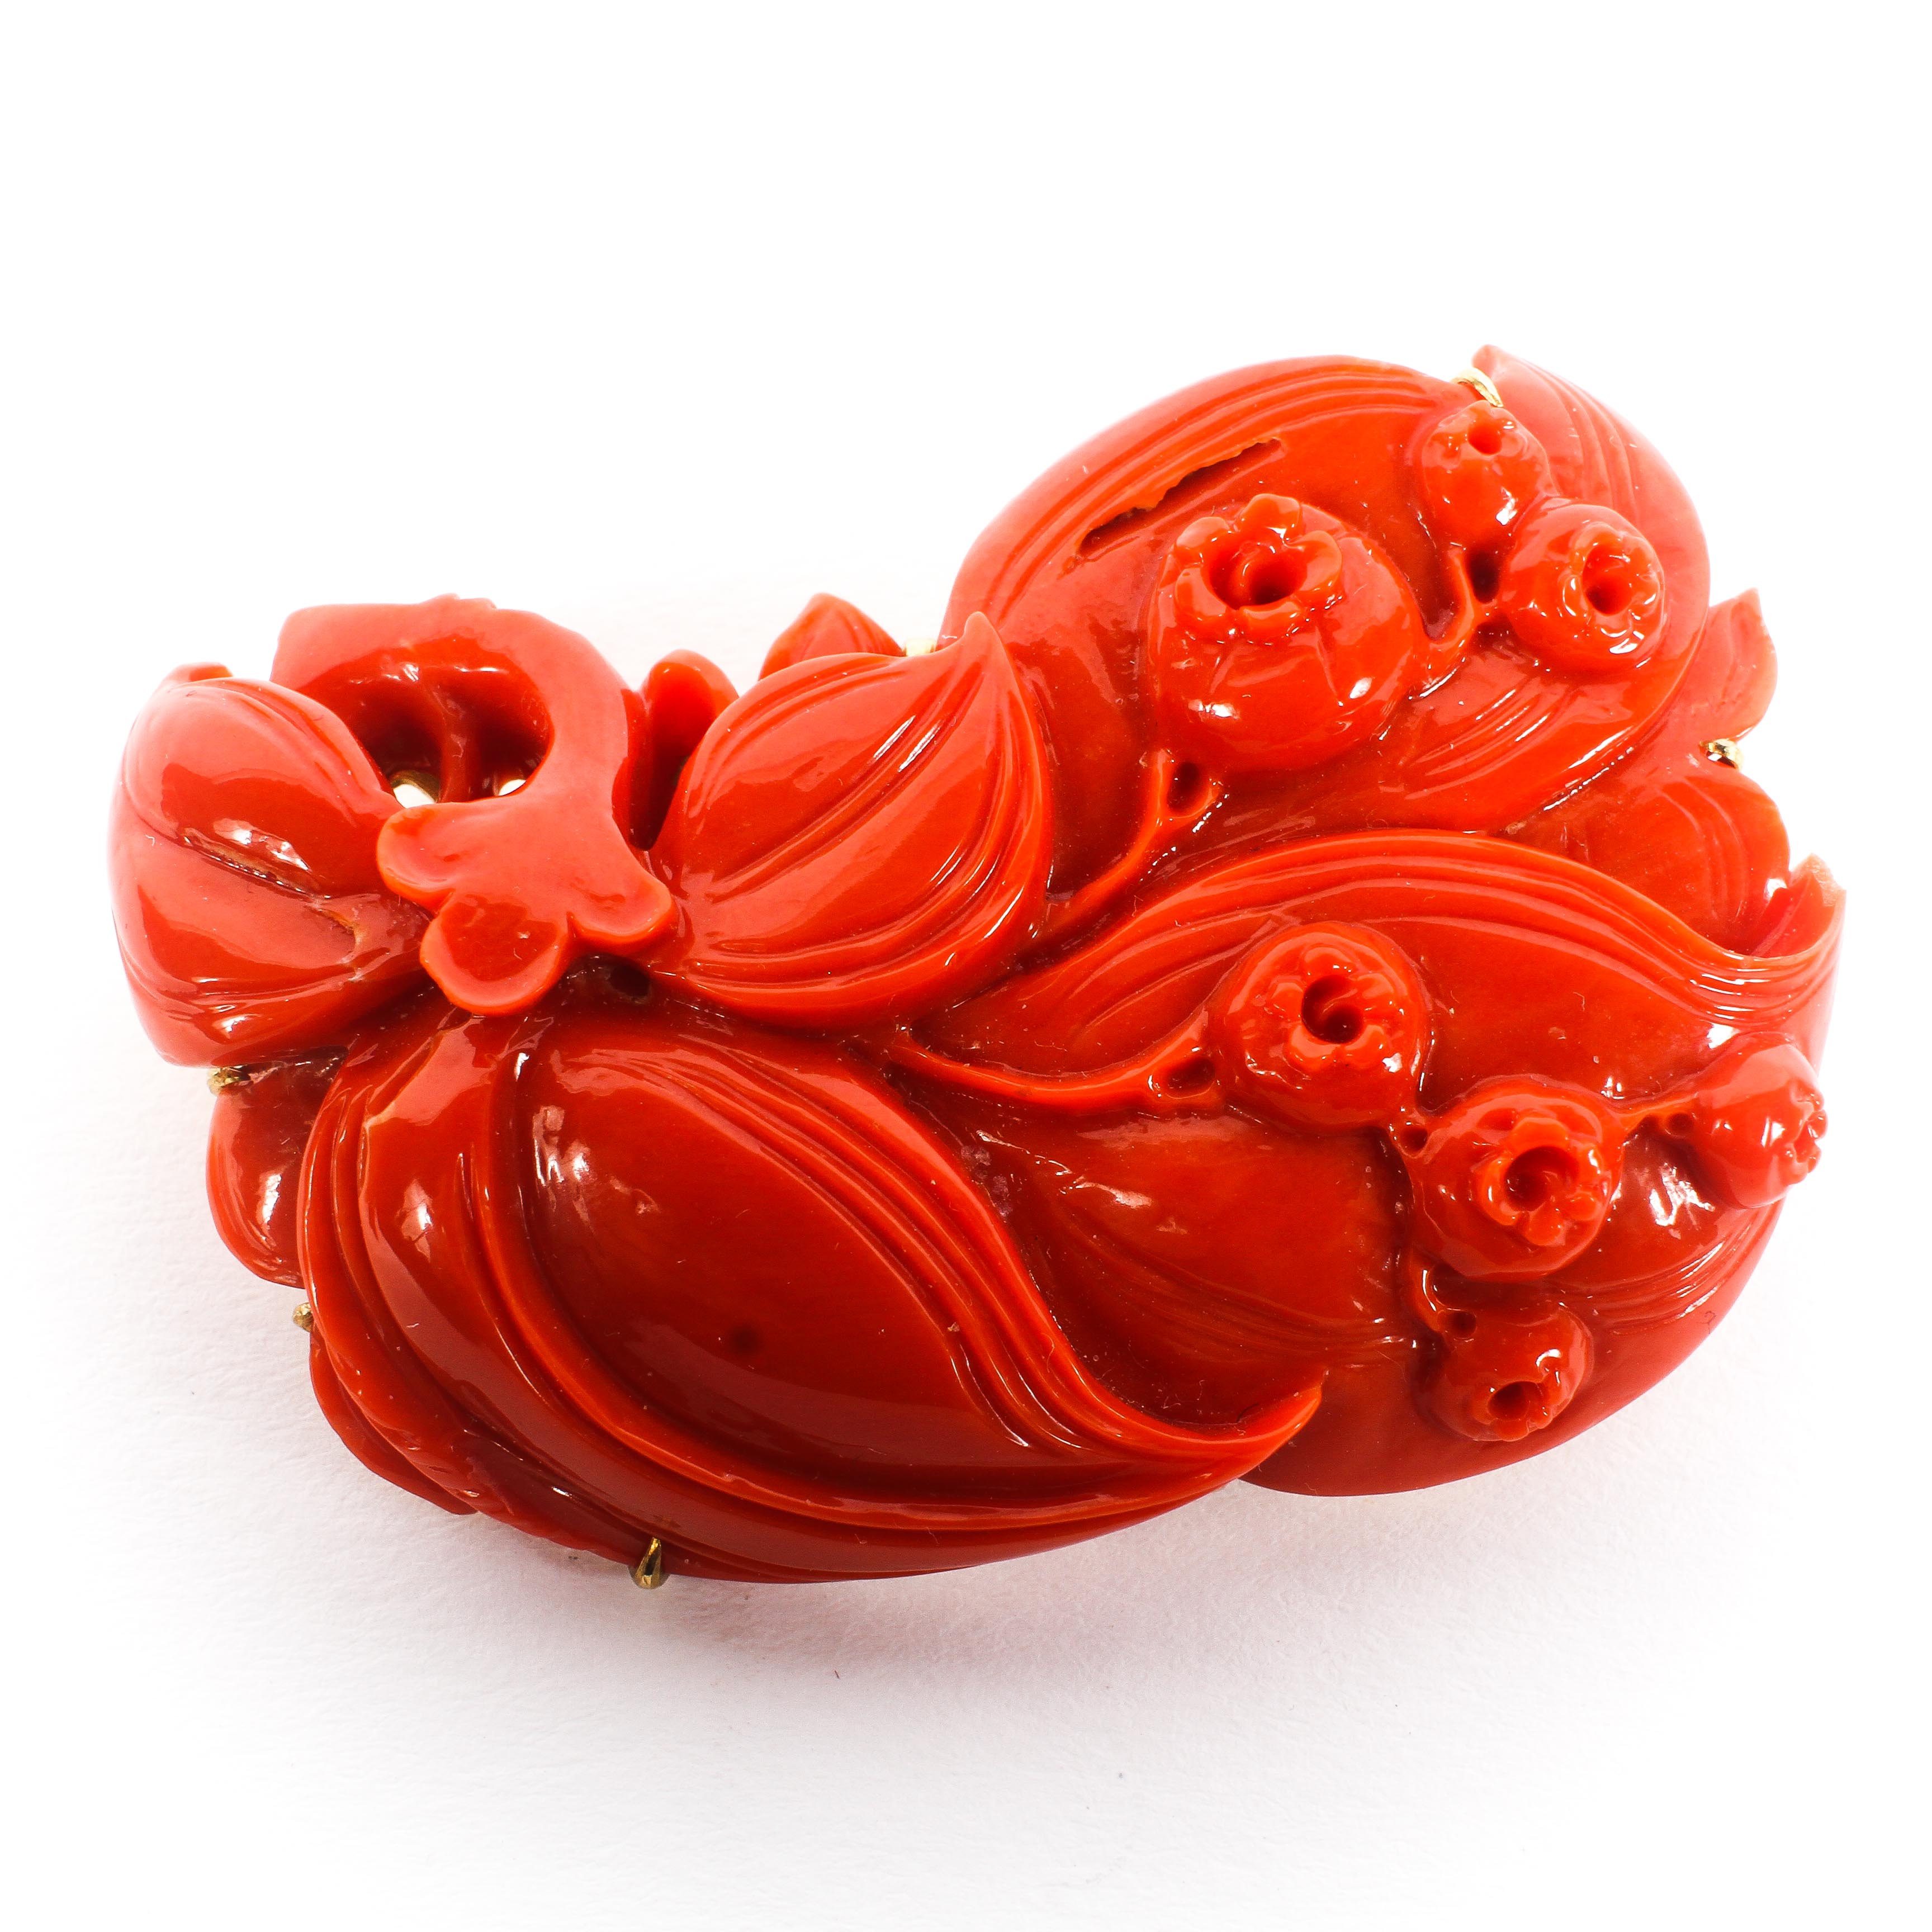 A 14ct gold mounted coral carved Art Nouveau style brooch, depicting flowers and berries,